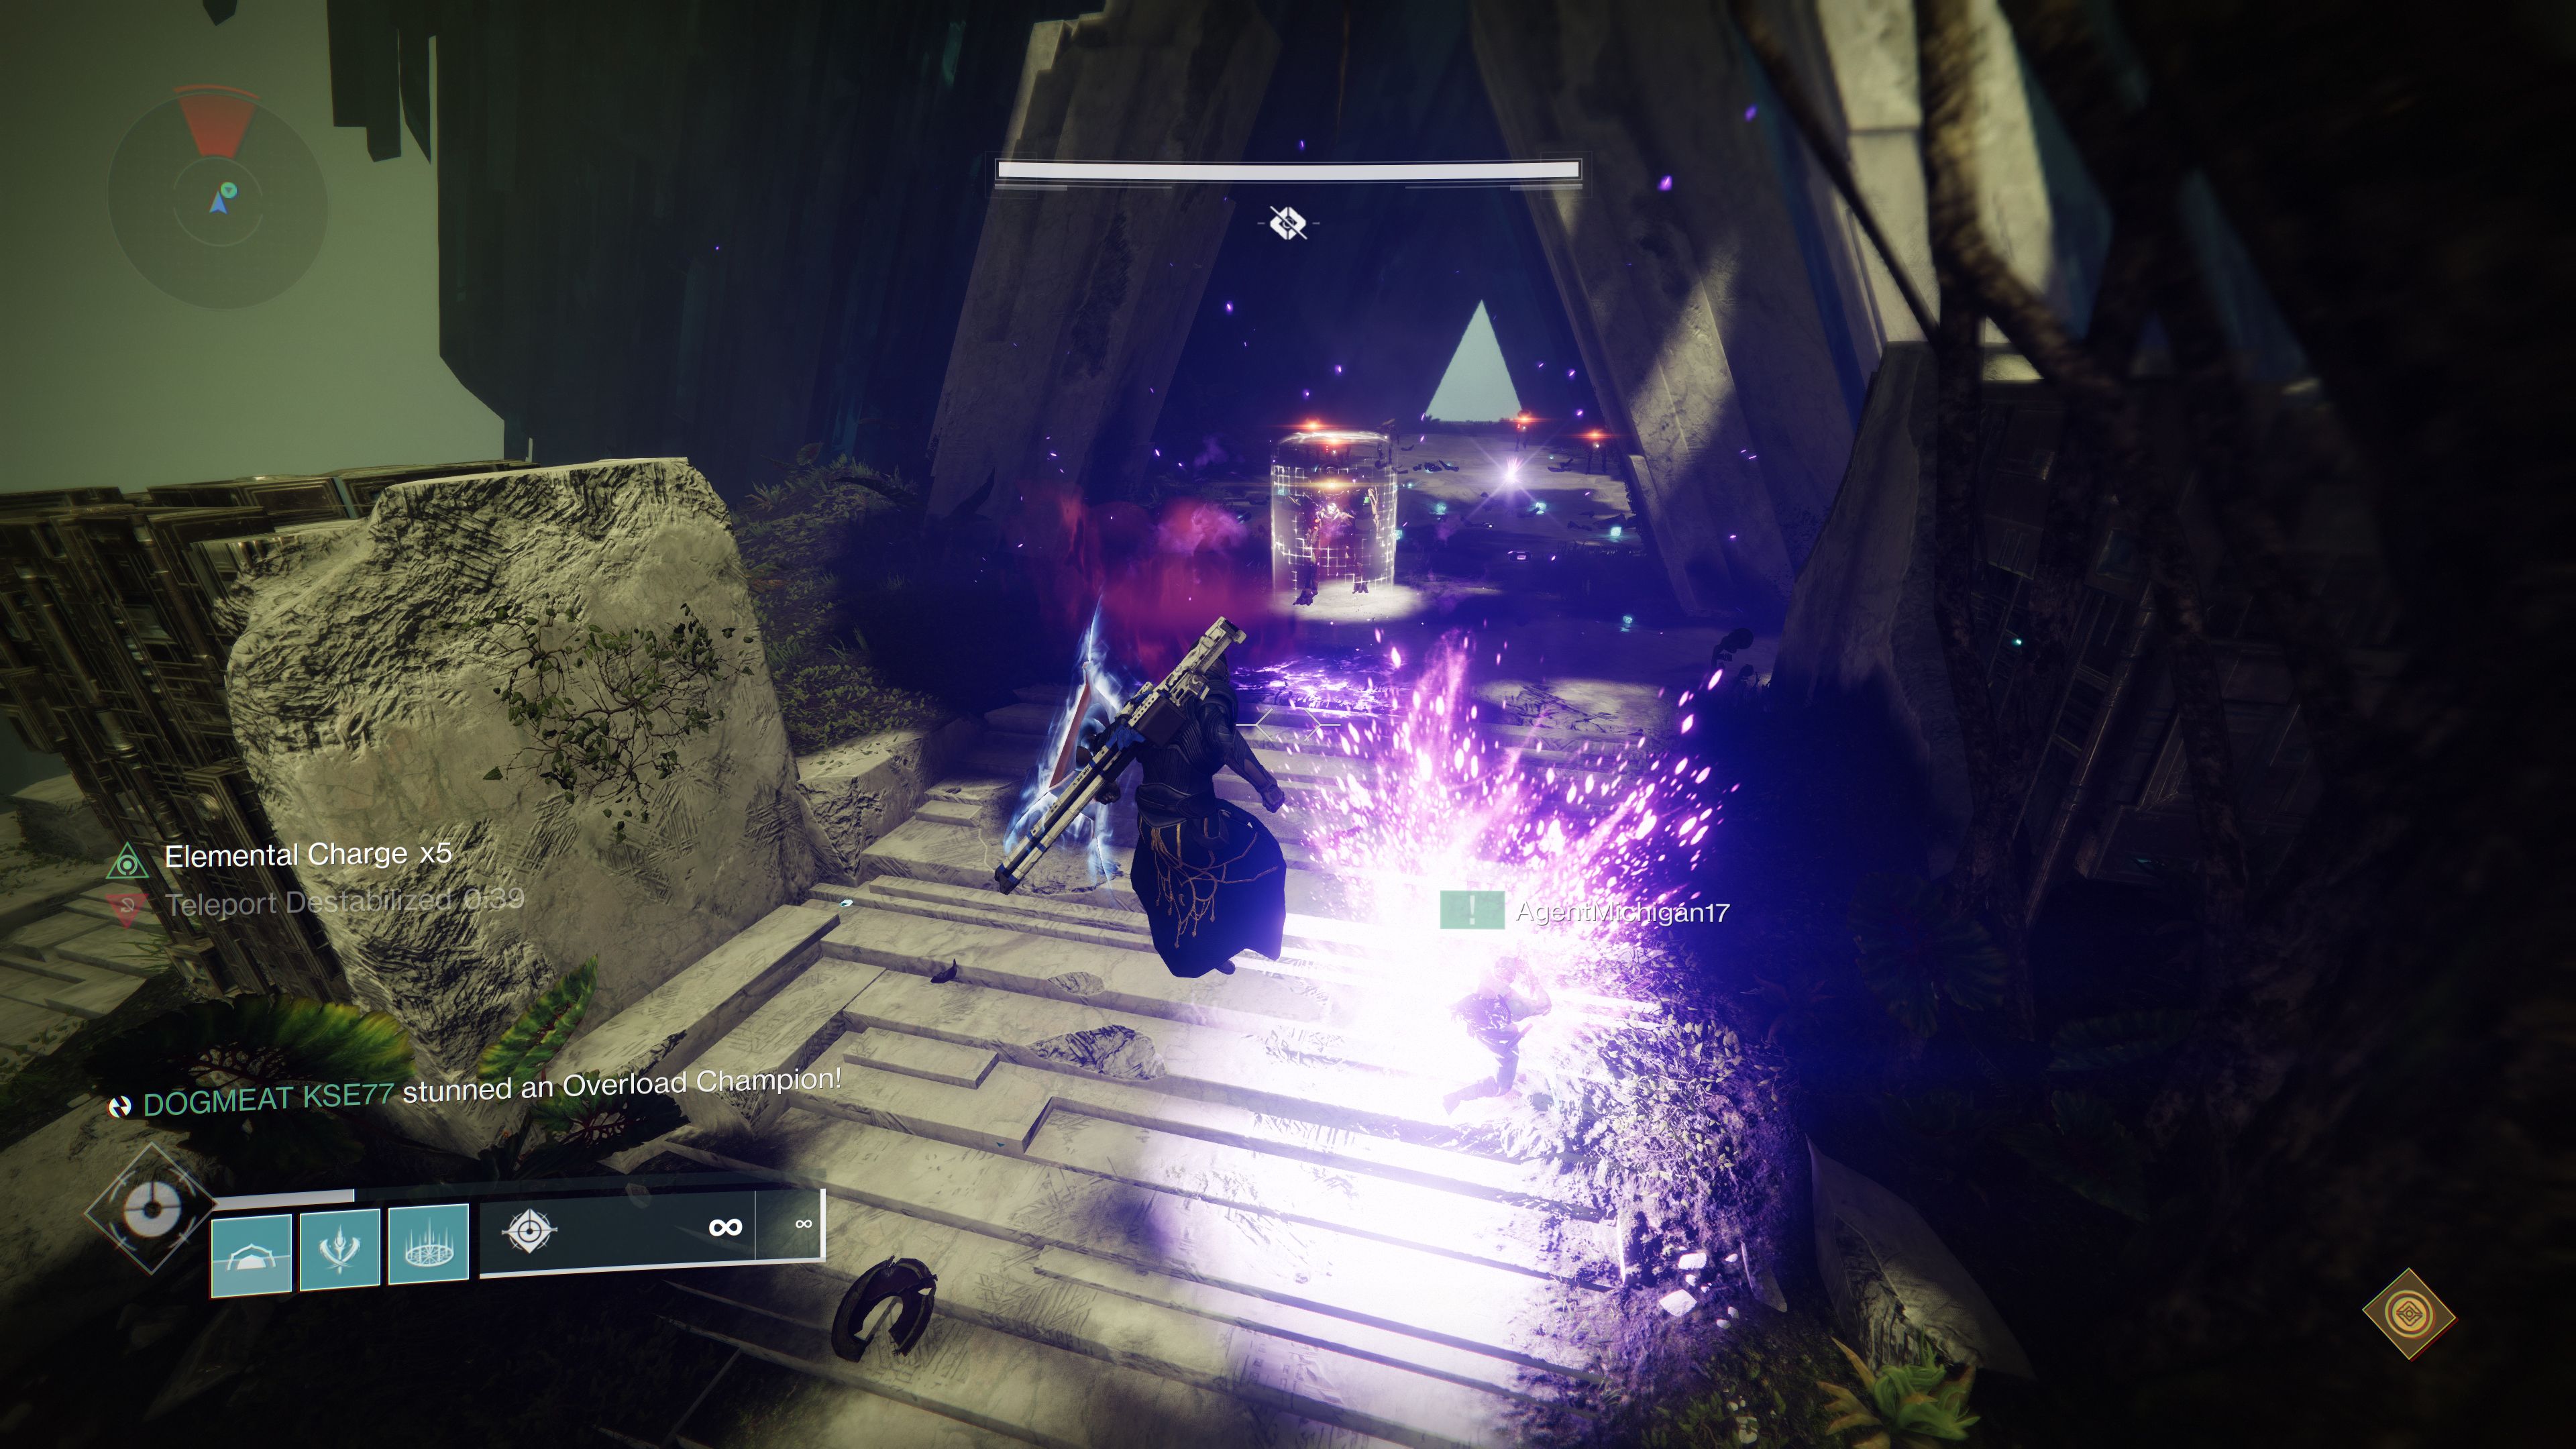 vault of glass raid guardian carrying relic shield in gatekeepers encounter